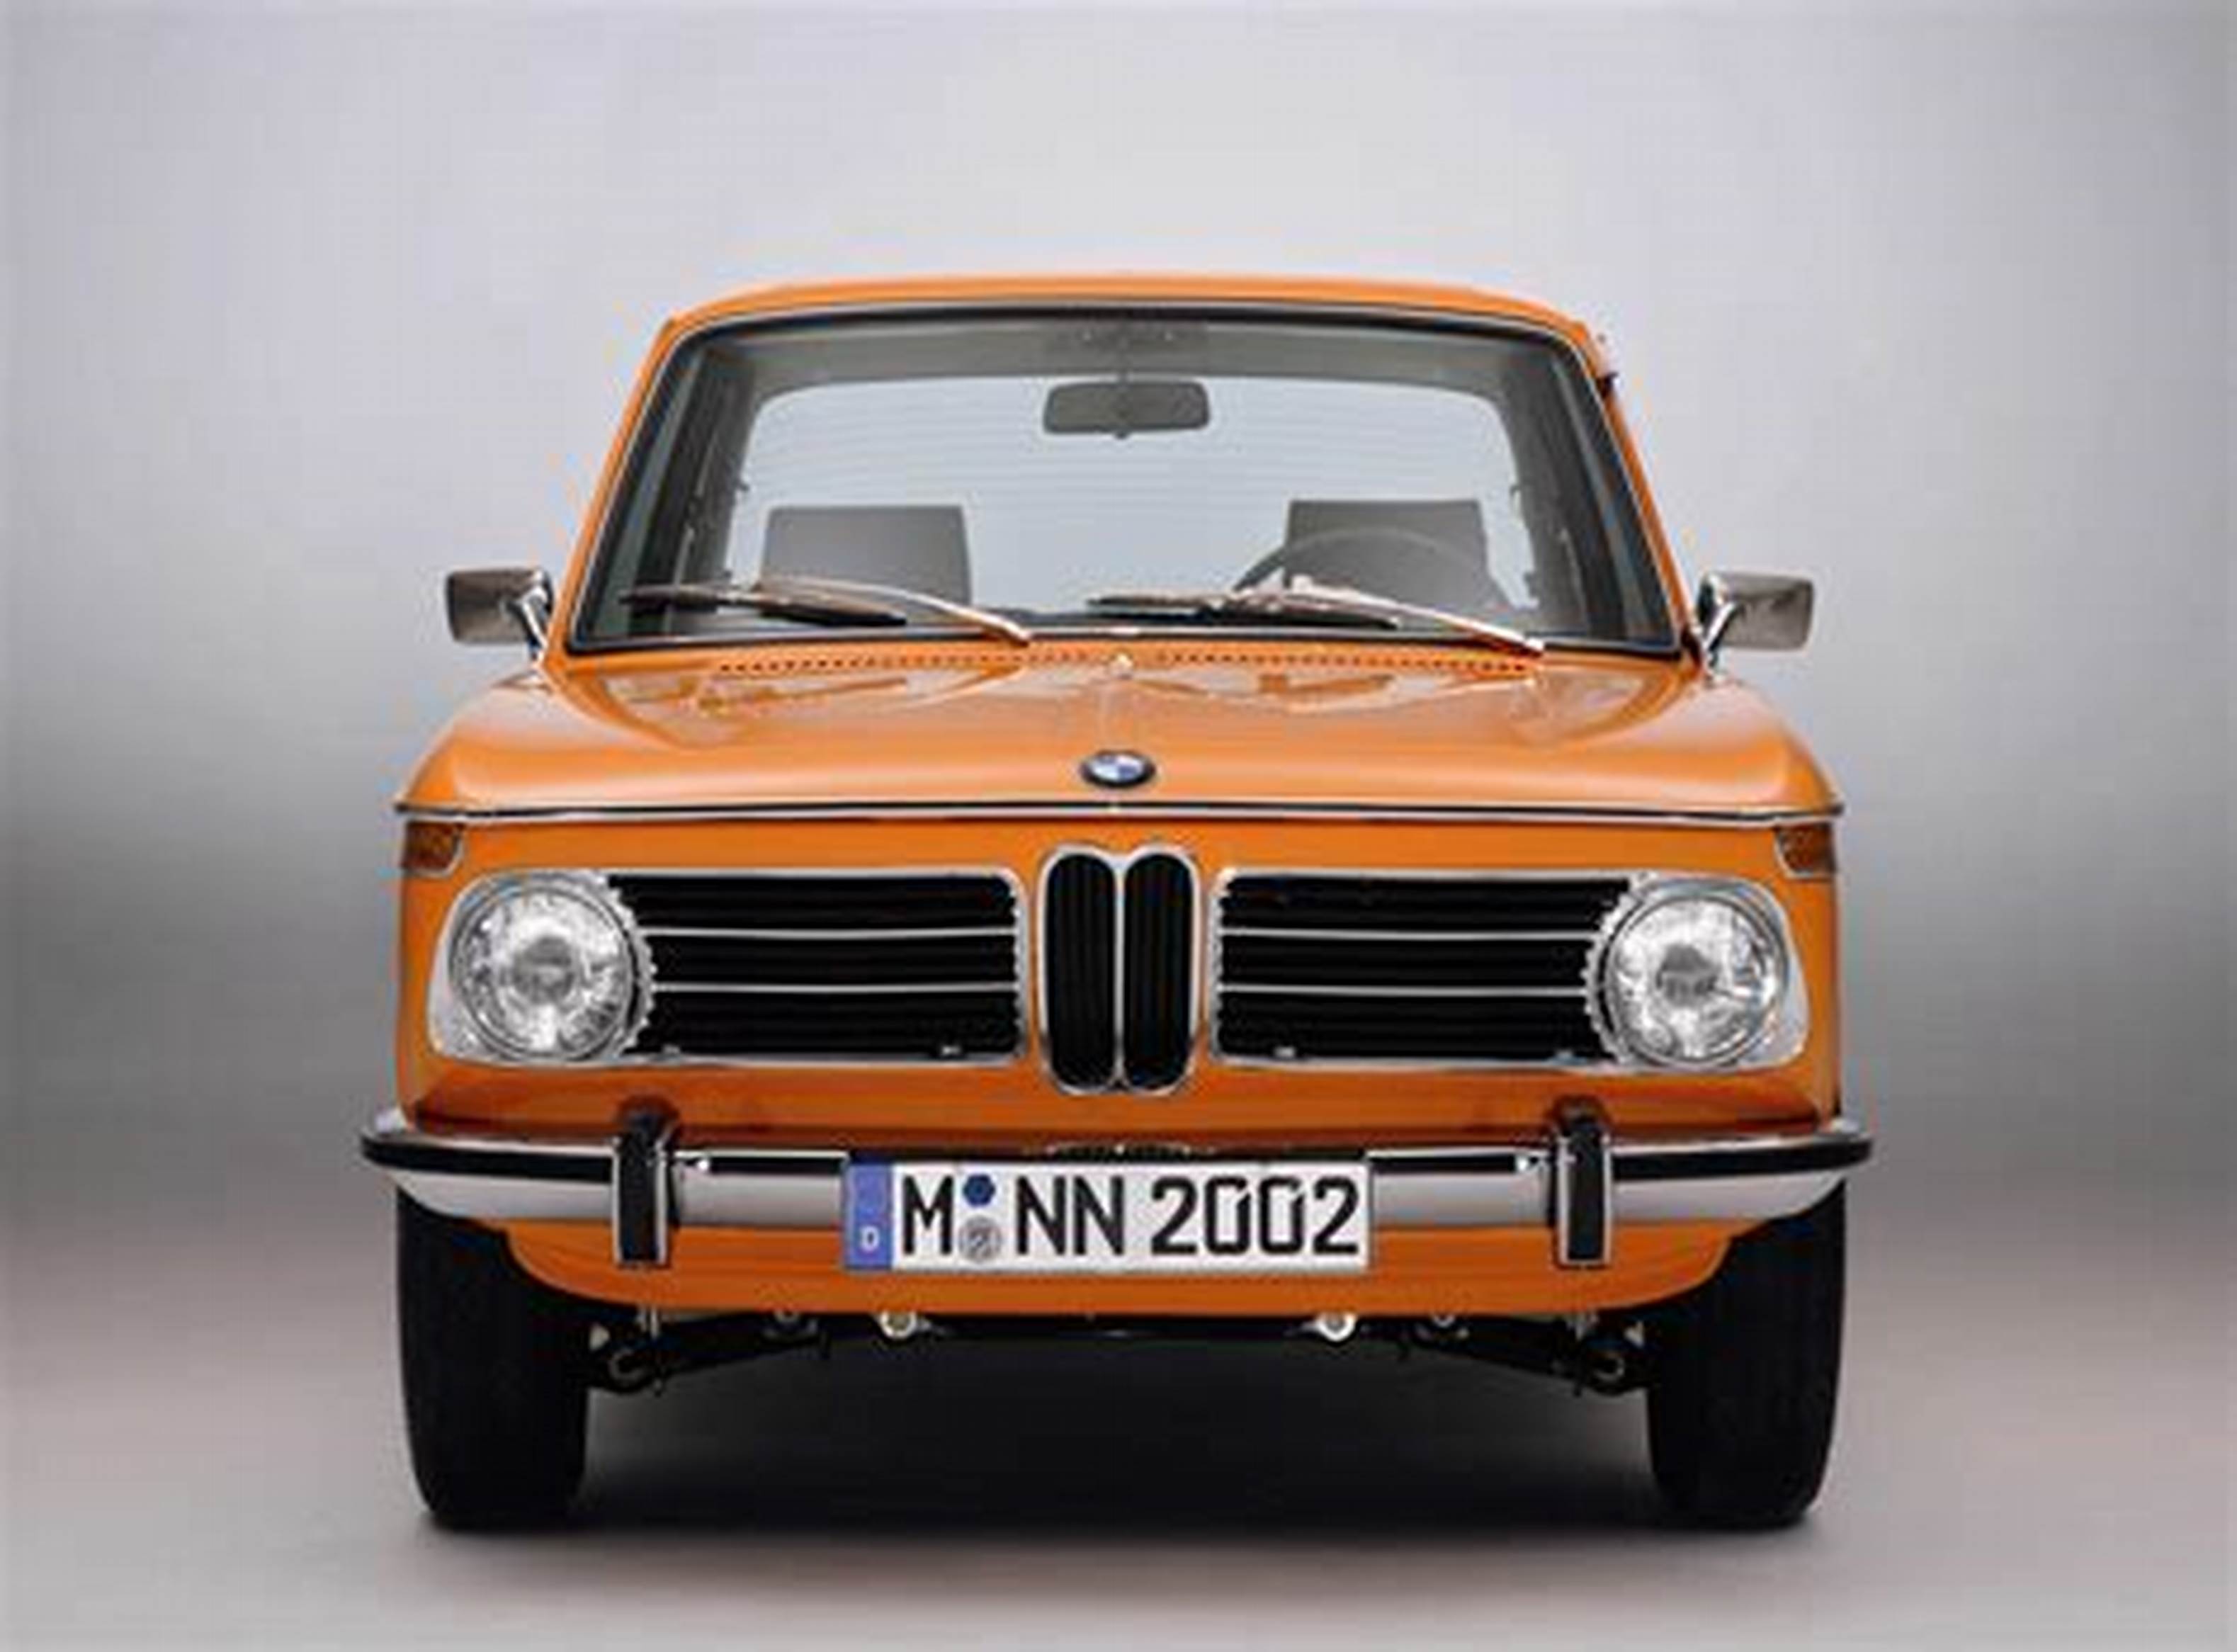 2002 BMW Models in 2002 – Celebrating An Iconic Coupe插图